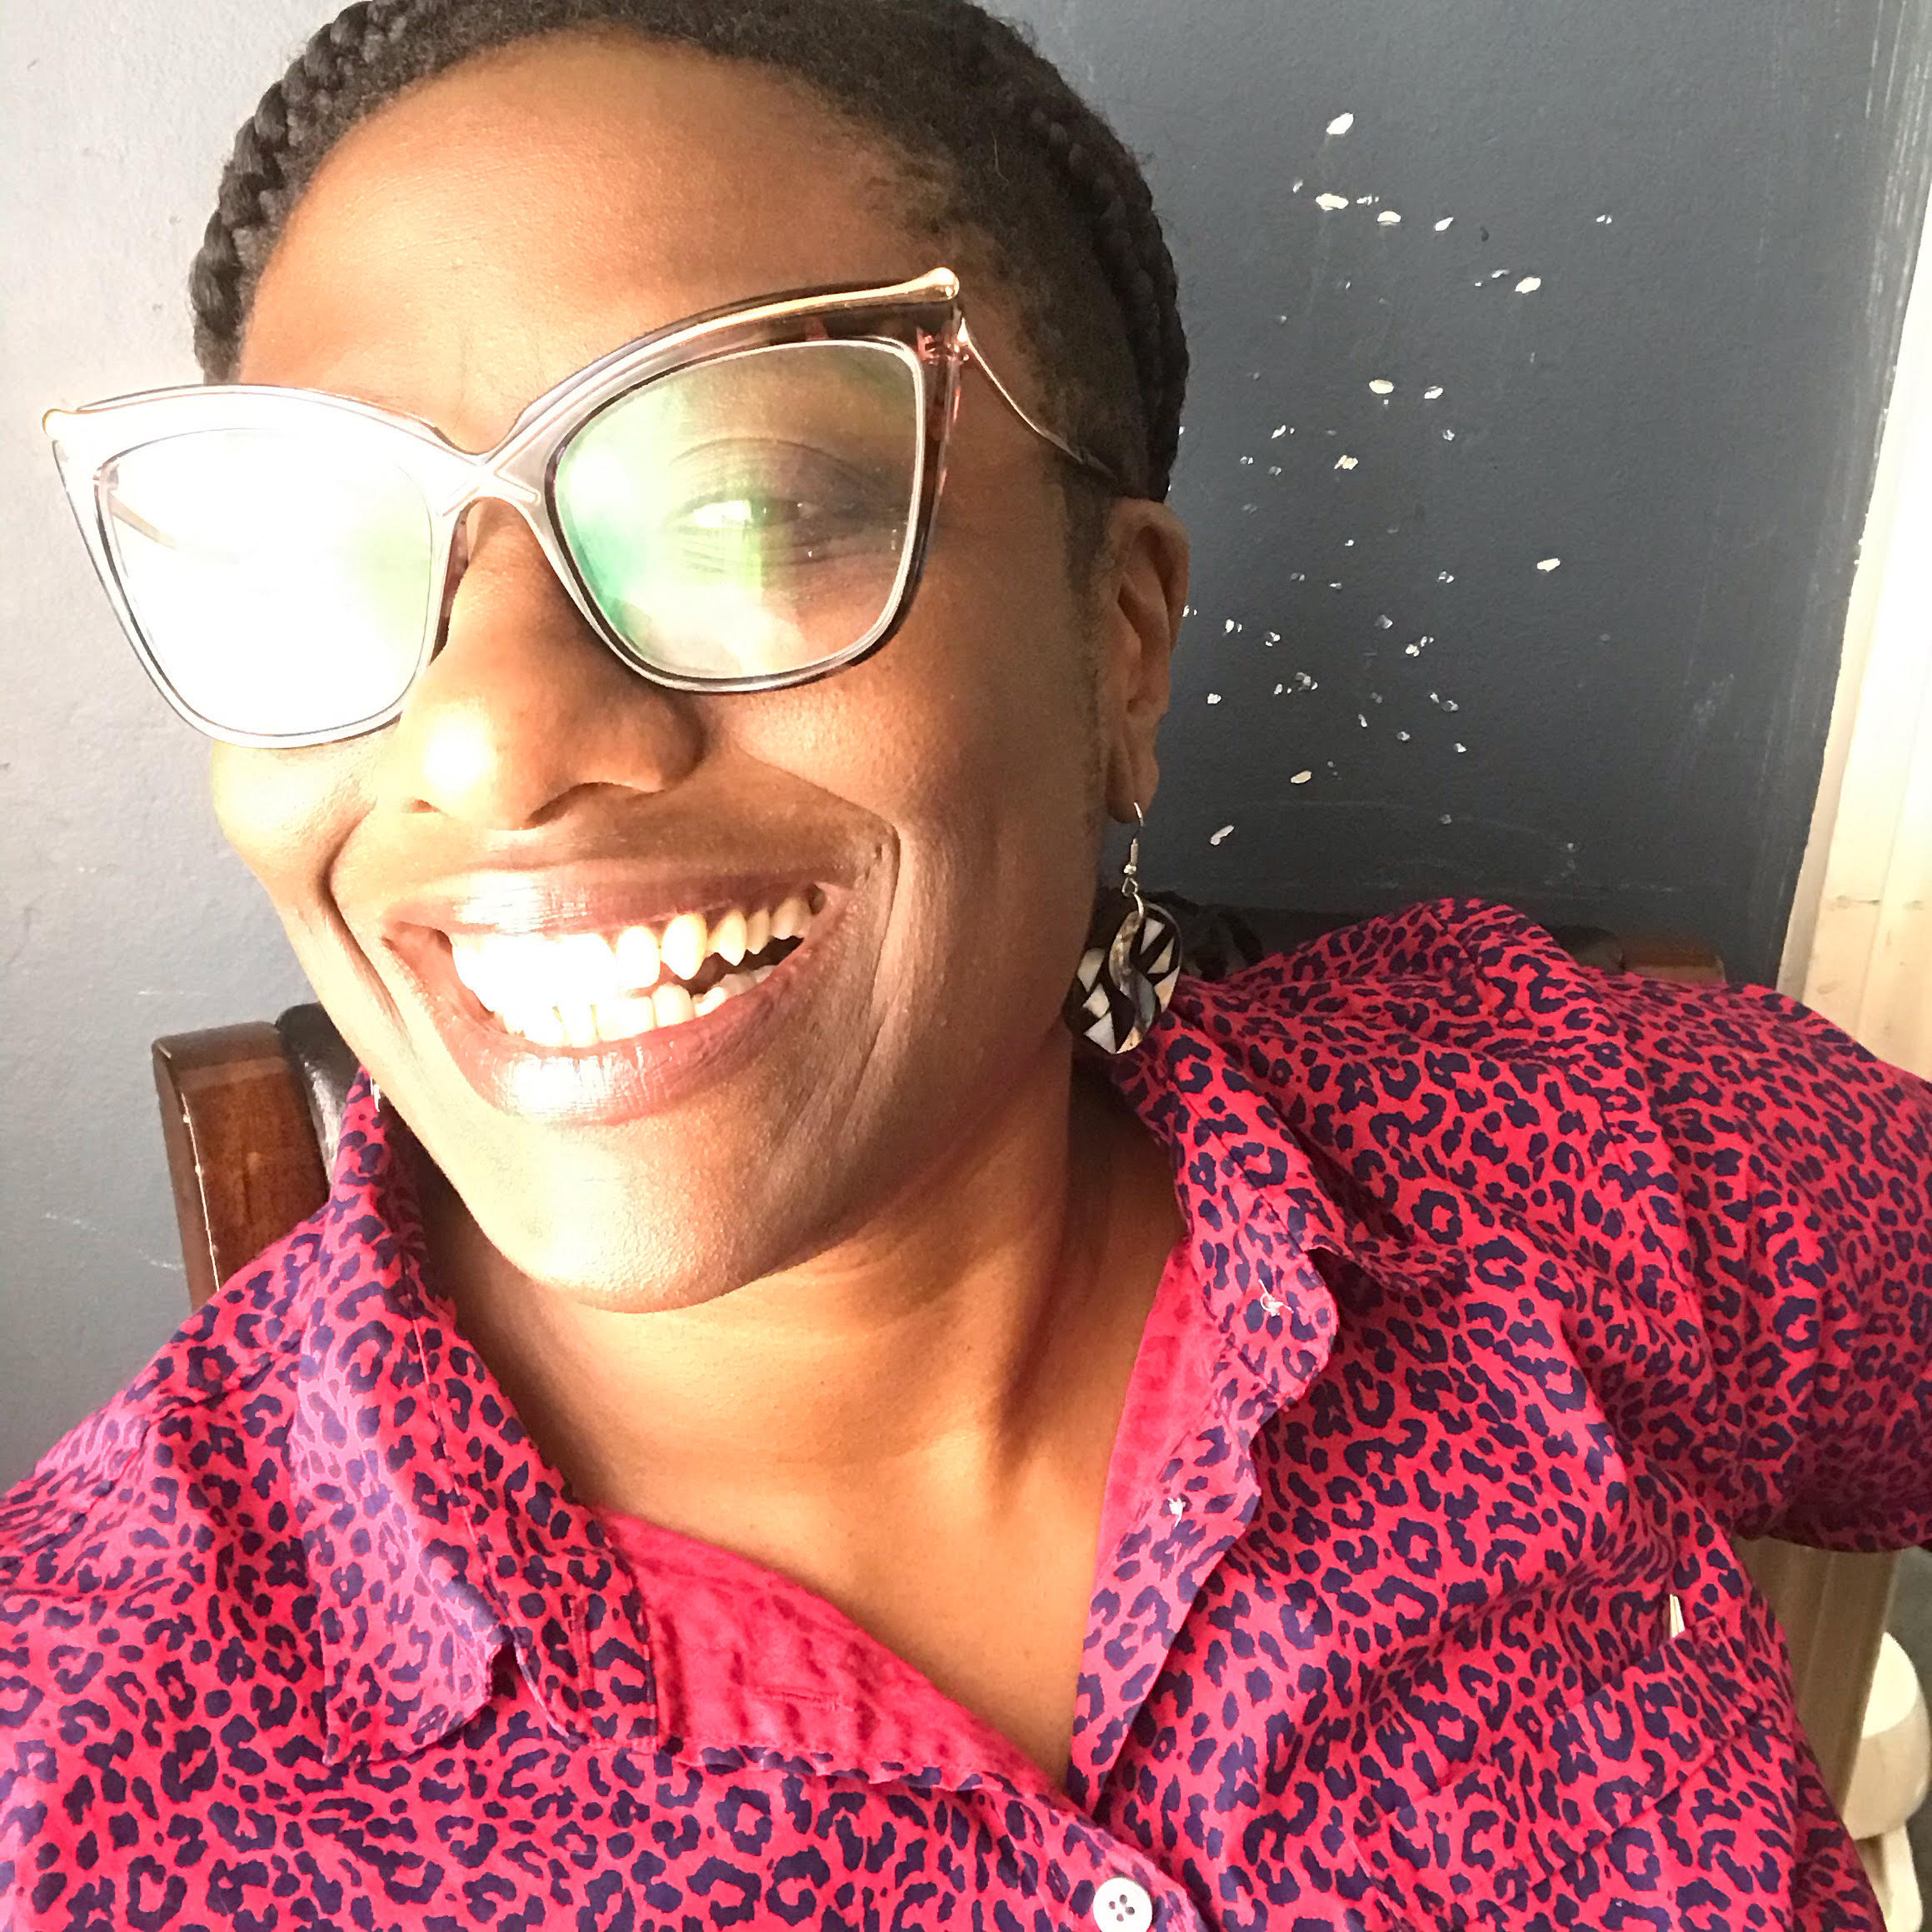 A picture of a Black woman wearing glasses smiling. She is wearing an animal print shirt and earrings.